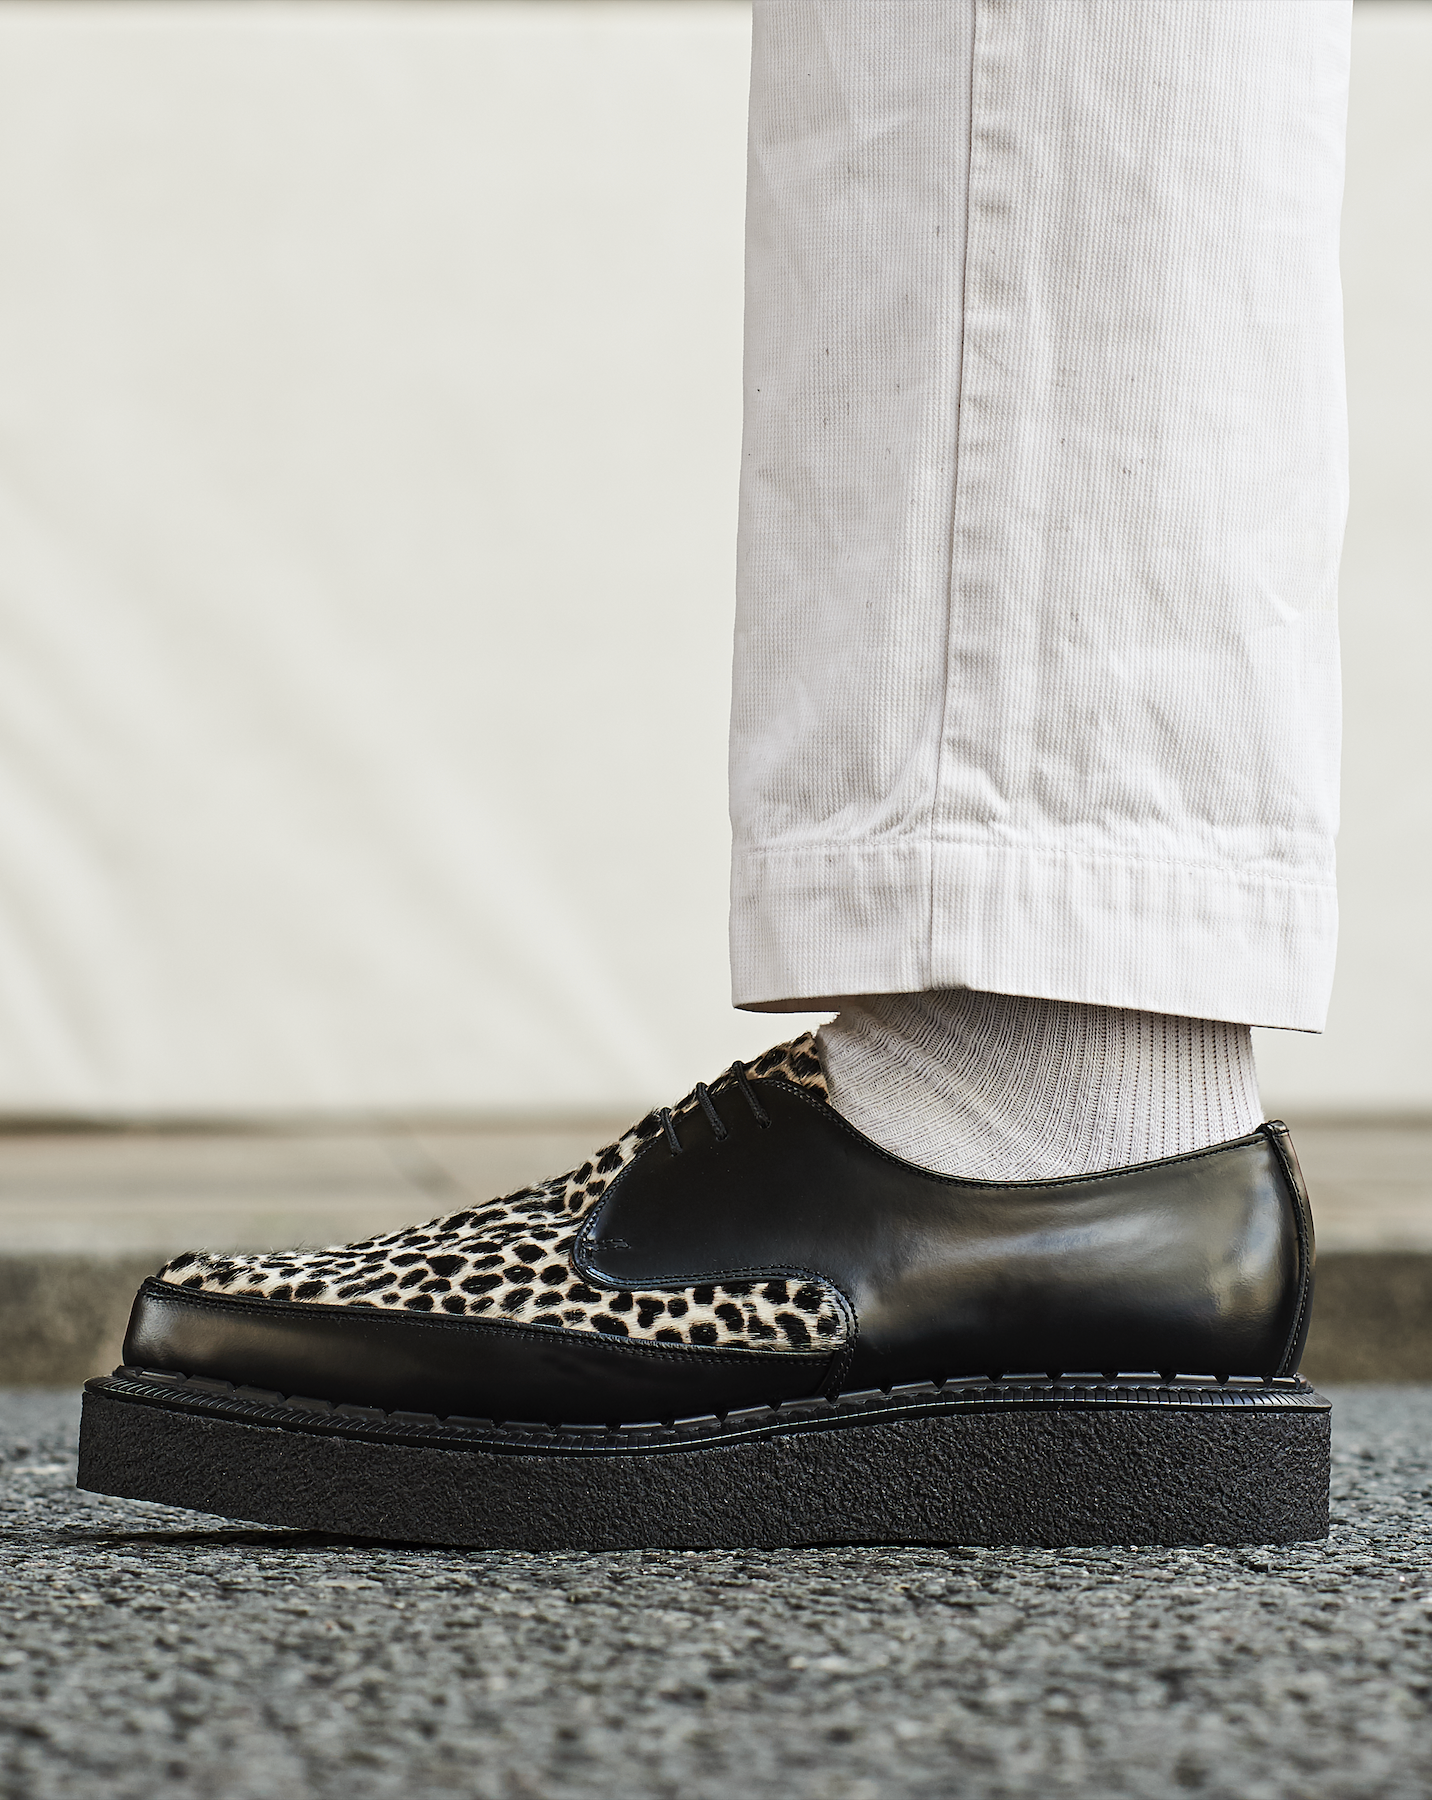 Black and leopard Diano Creeper on pavement